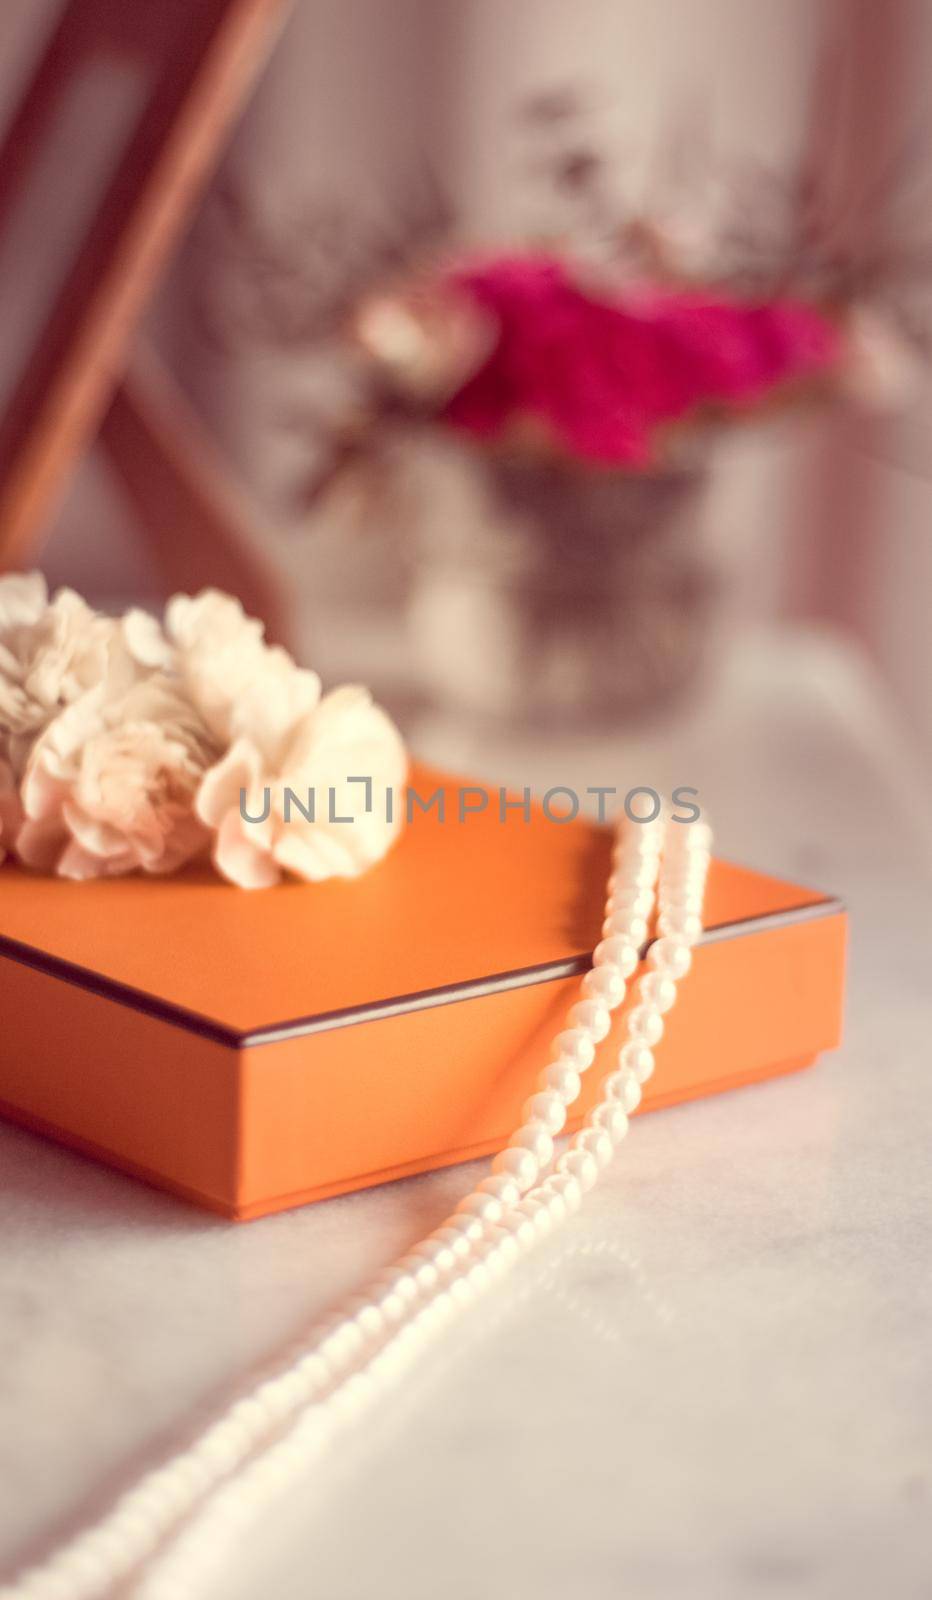 Present box and flowers for her - Mother's day ideas, happy giving and holiday inspiration concept. The perfect gift for mom